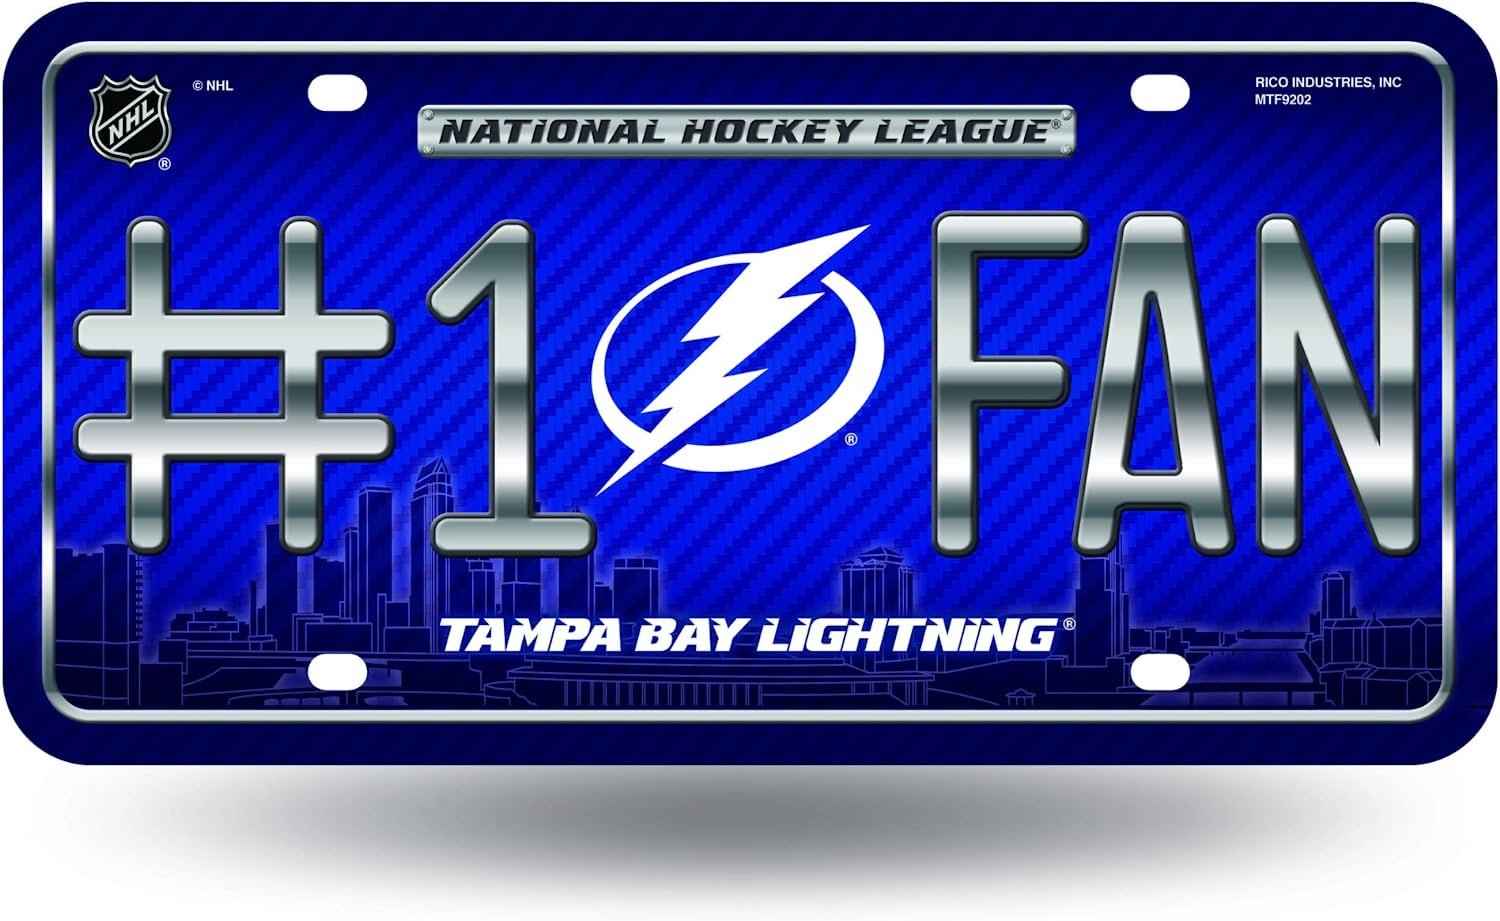 Tampa Bay Lightning Metal Auto Tag License Plate, #1 Fan Design, 12x6 Inch